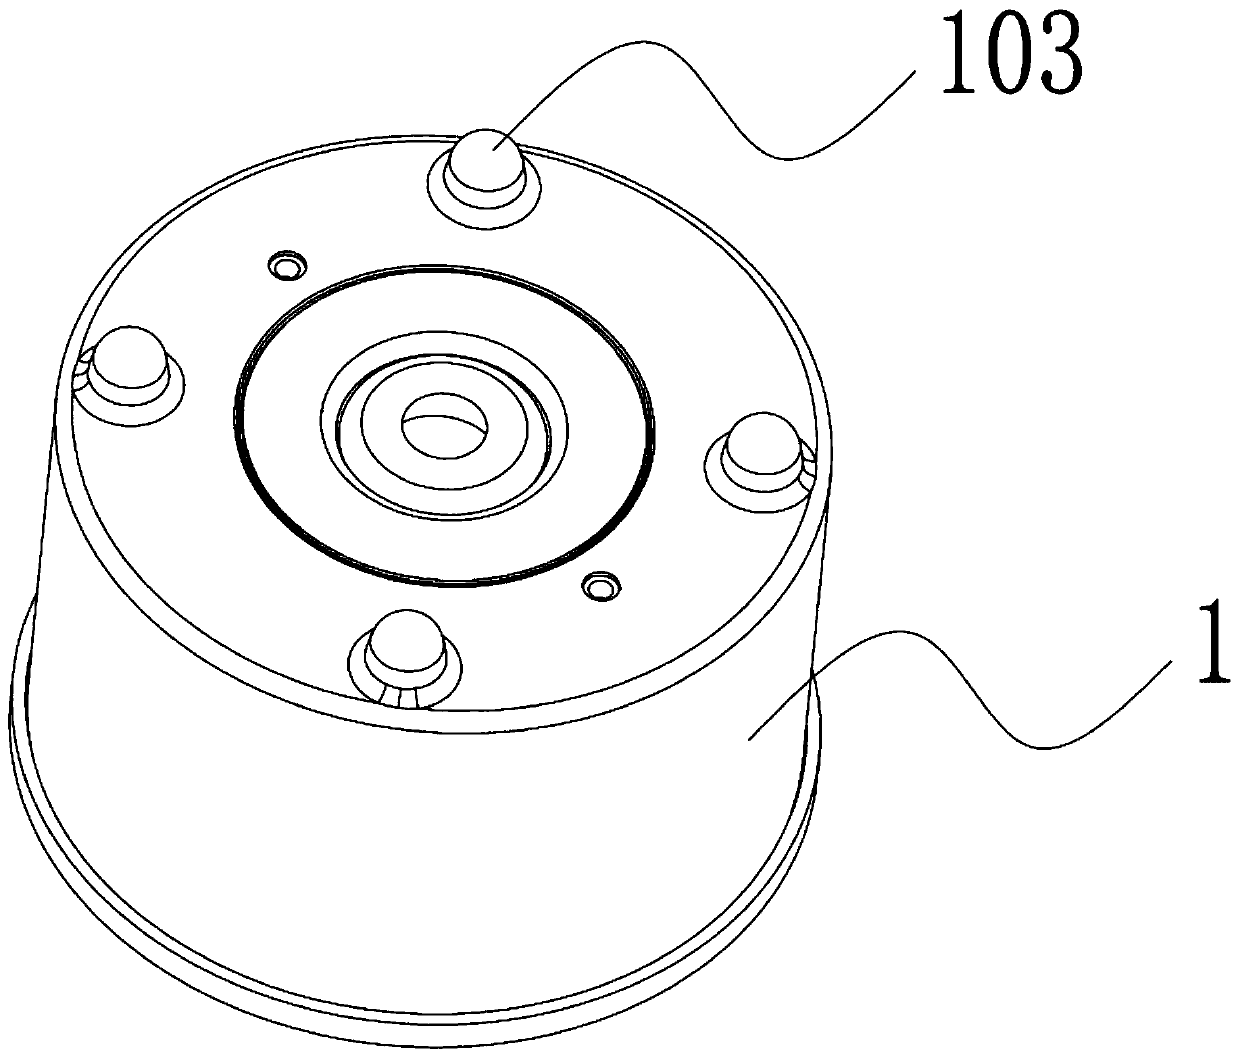 Solenoid valve and digester thereof